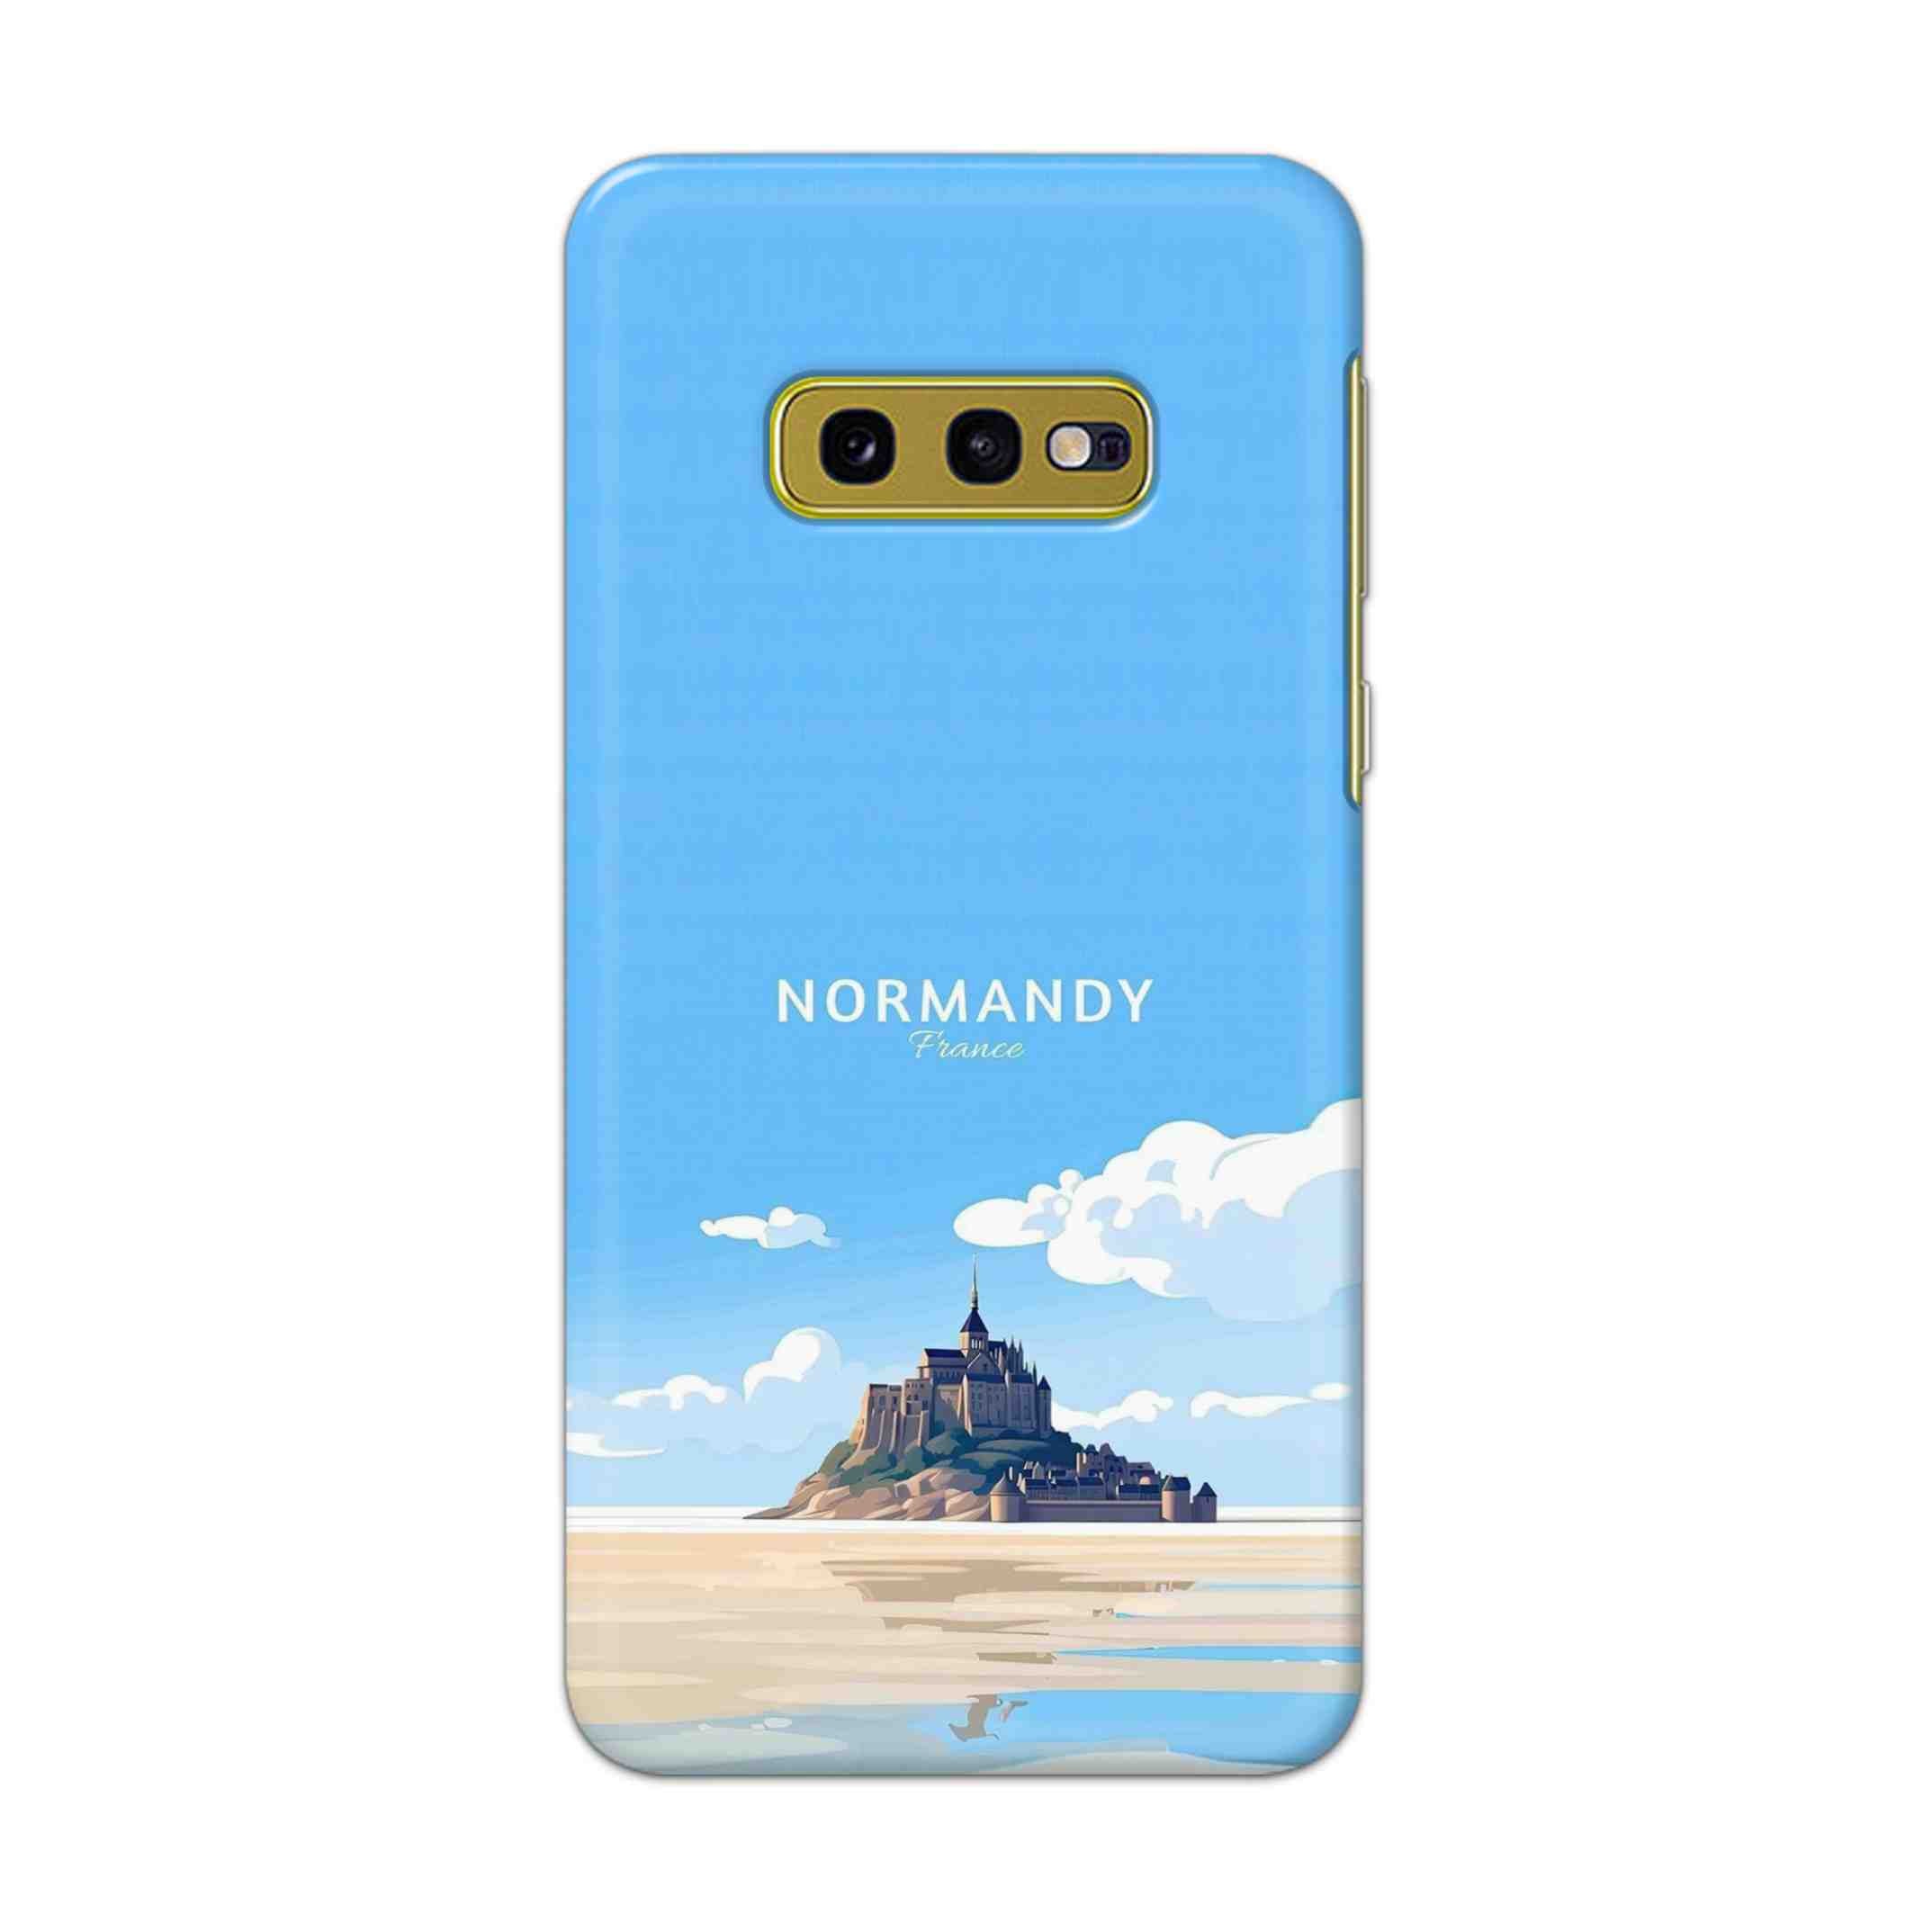 Buy Normandy Hard Back Mobile Phone Case Cover For Samsung Galaxy S10e Online